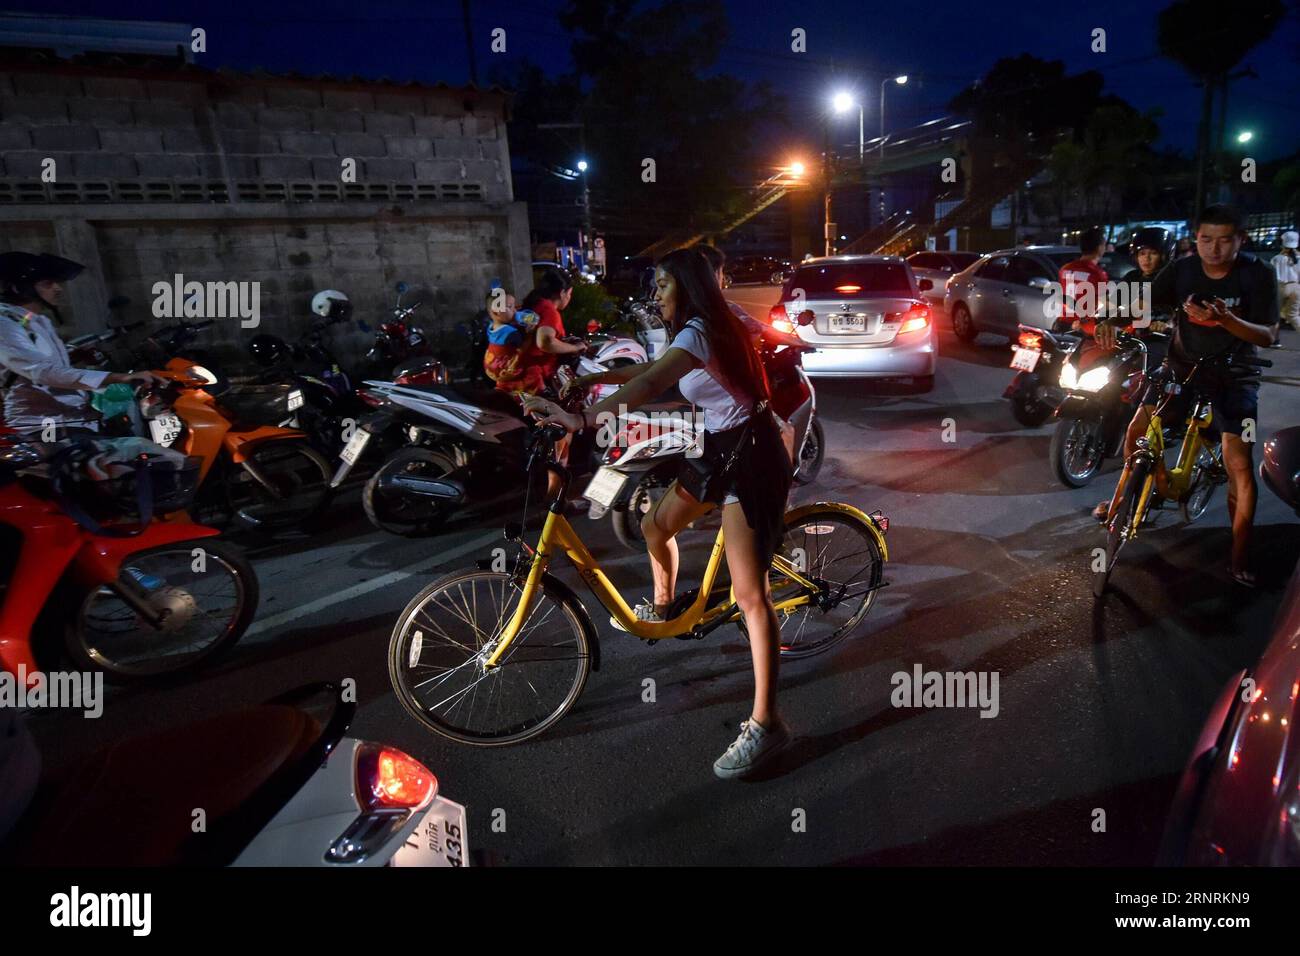 (171007) -- PHUKET, Oct. 7, 2017 -- Local residents ride ofo sharing-bikes in Phuket, Thailand, Oct. 5, 2017. China s dock-less bike-sharing company ofo provided more than 1,000 bikes in Phuket s key locations in late September and offered a 1-month free trial without deposit fee. Now the bike-sharing service has benefited local residents and tourists. Ofo s regular service fee will be charged at 5 Baht per 30 minutes usage, with a deposit fee of 99 Baht. )(zhf) THAILAND-PHUKET-CHINA-BIKE-SHARING-OFO LixMangmang PUBLICATIONxNOTxINxCHN Stock Photo